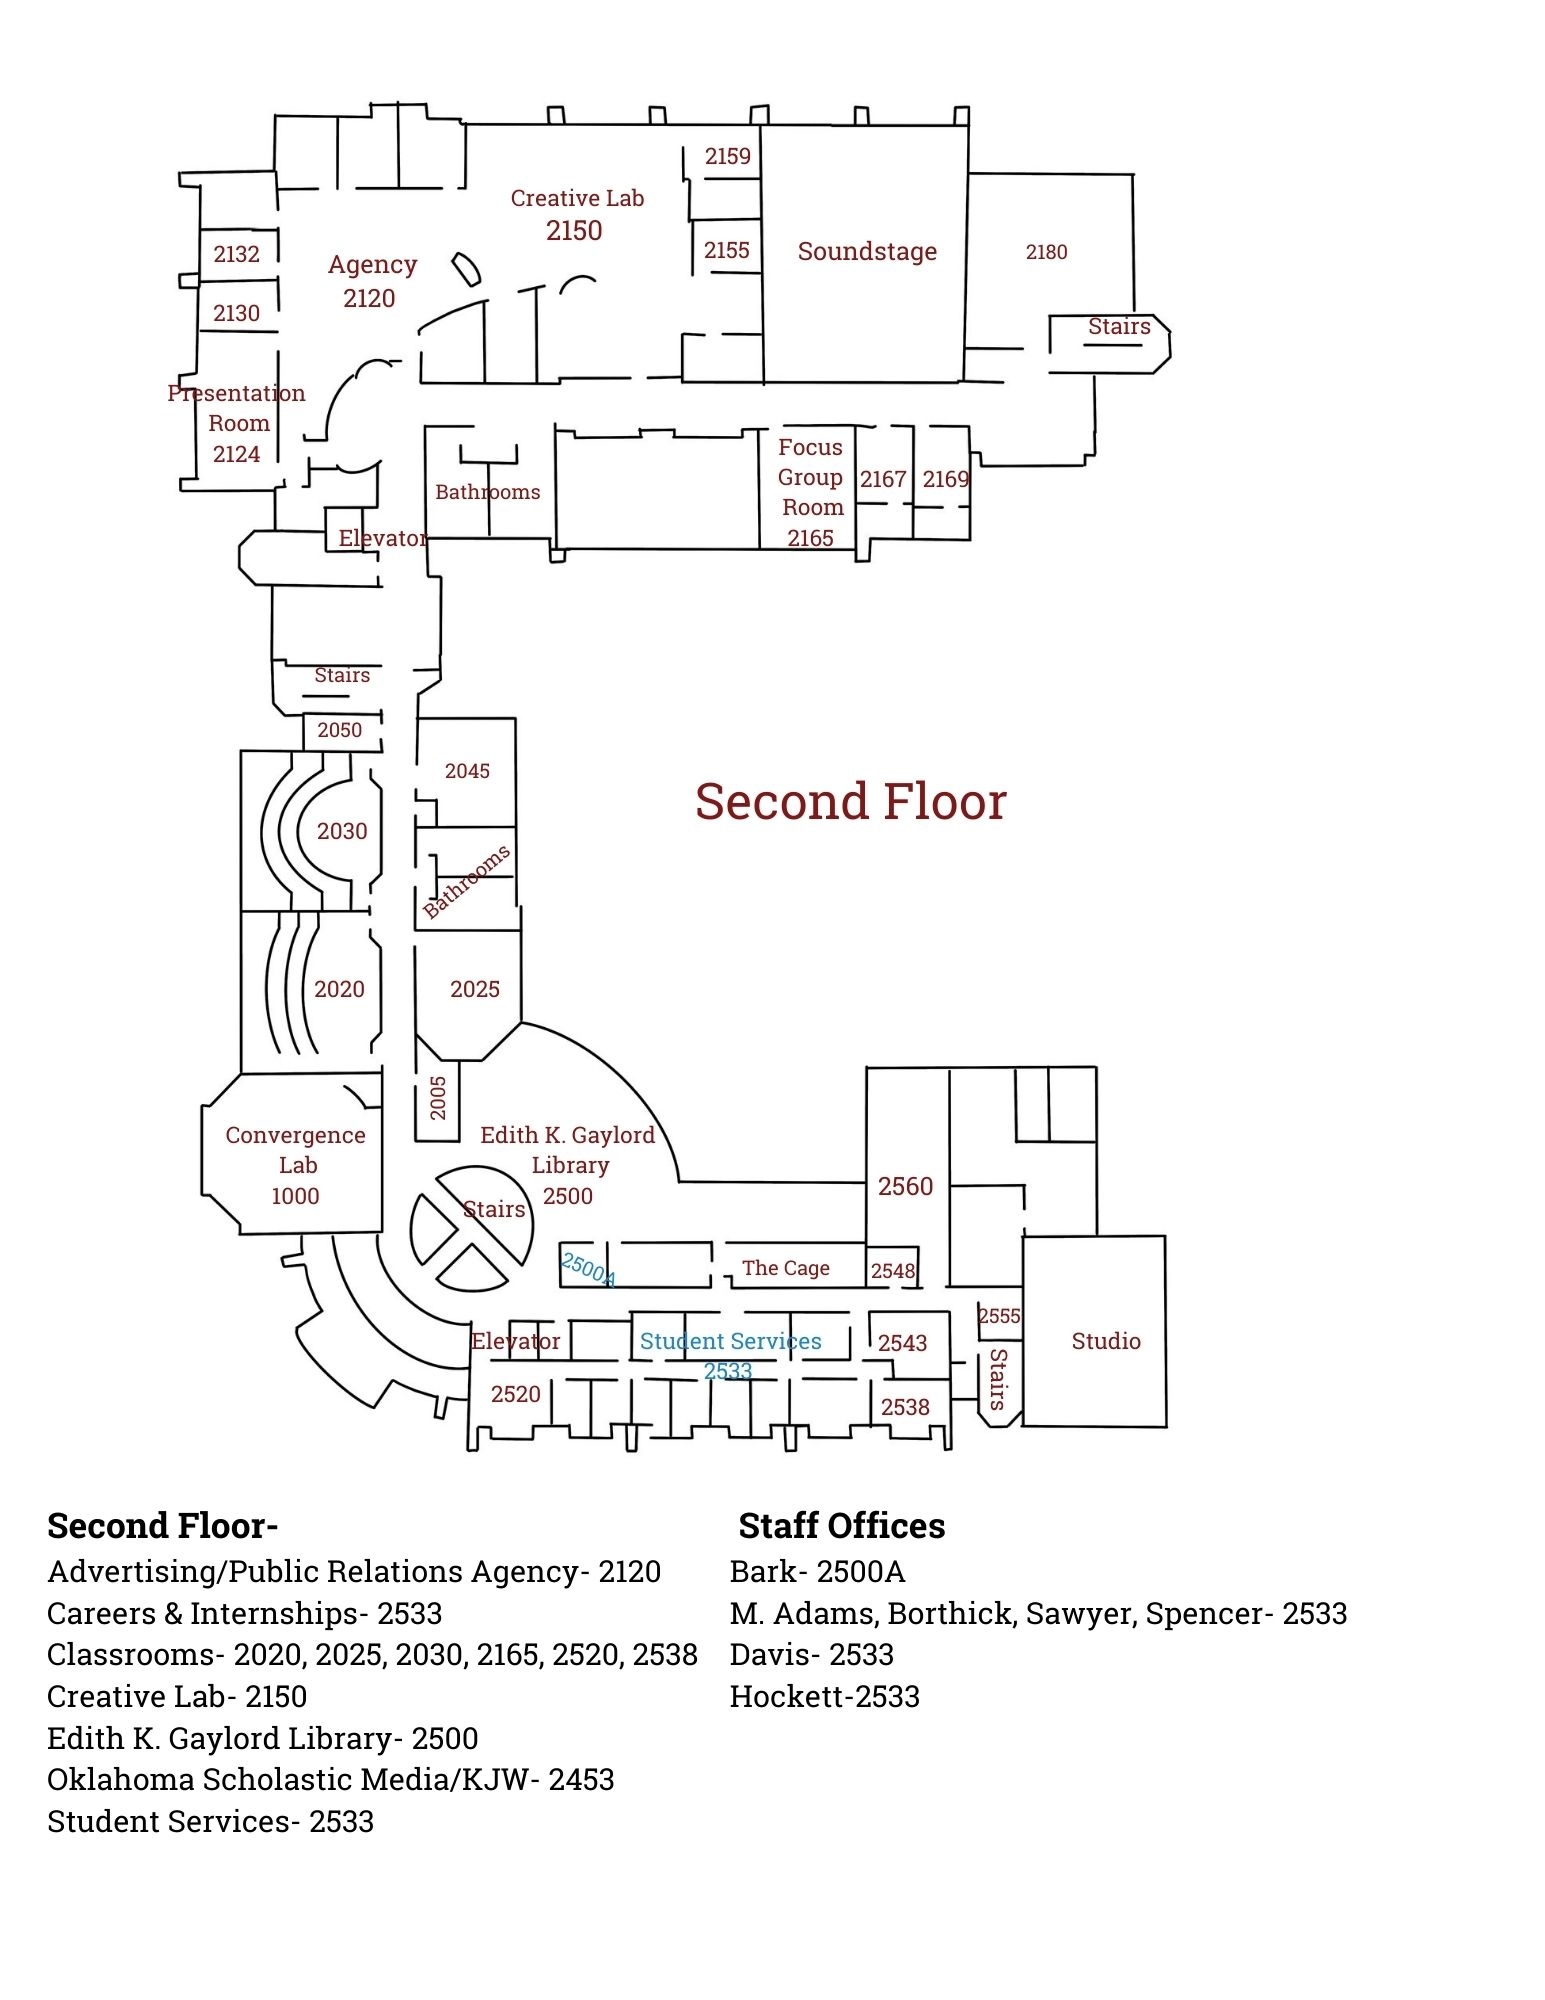 Building layout of Gaylord Hall, Floor 2; Advertising/Public Relations Agency - 2120; Careers & Internships - 2533; Classrooms - 2020, 2025, 2030, 2165, 2520, 2538; Creative Lab - 2150; Edith K. Gaylord Library - 2500; Oklahoma Scholastic Media/KJW - 2453; Student Services - 2533; Staff Offices: Bark - 2500A;  M. Adams, Borthick, Sawyer, Spencer - 2533; Davis - 2533; Hockett -2533   